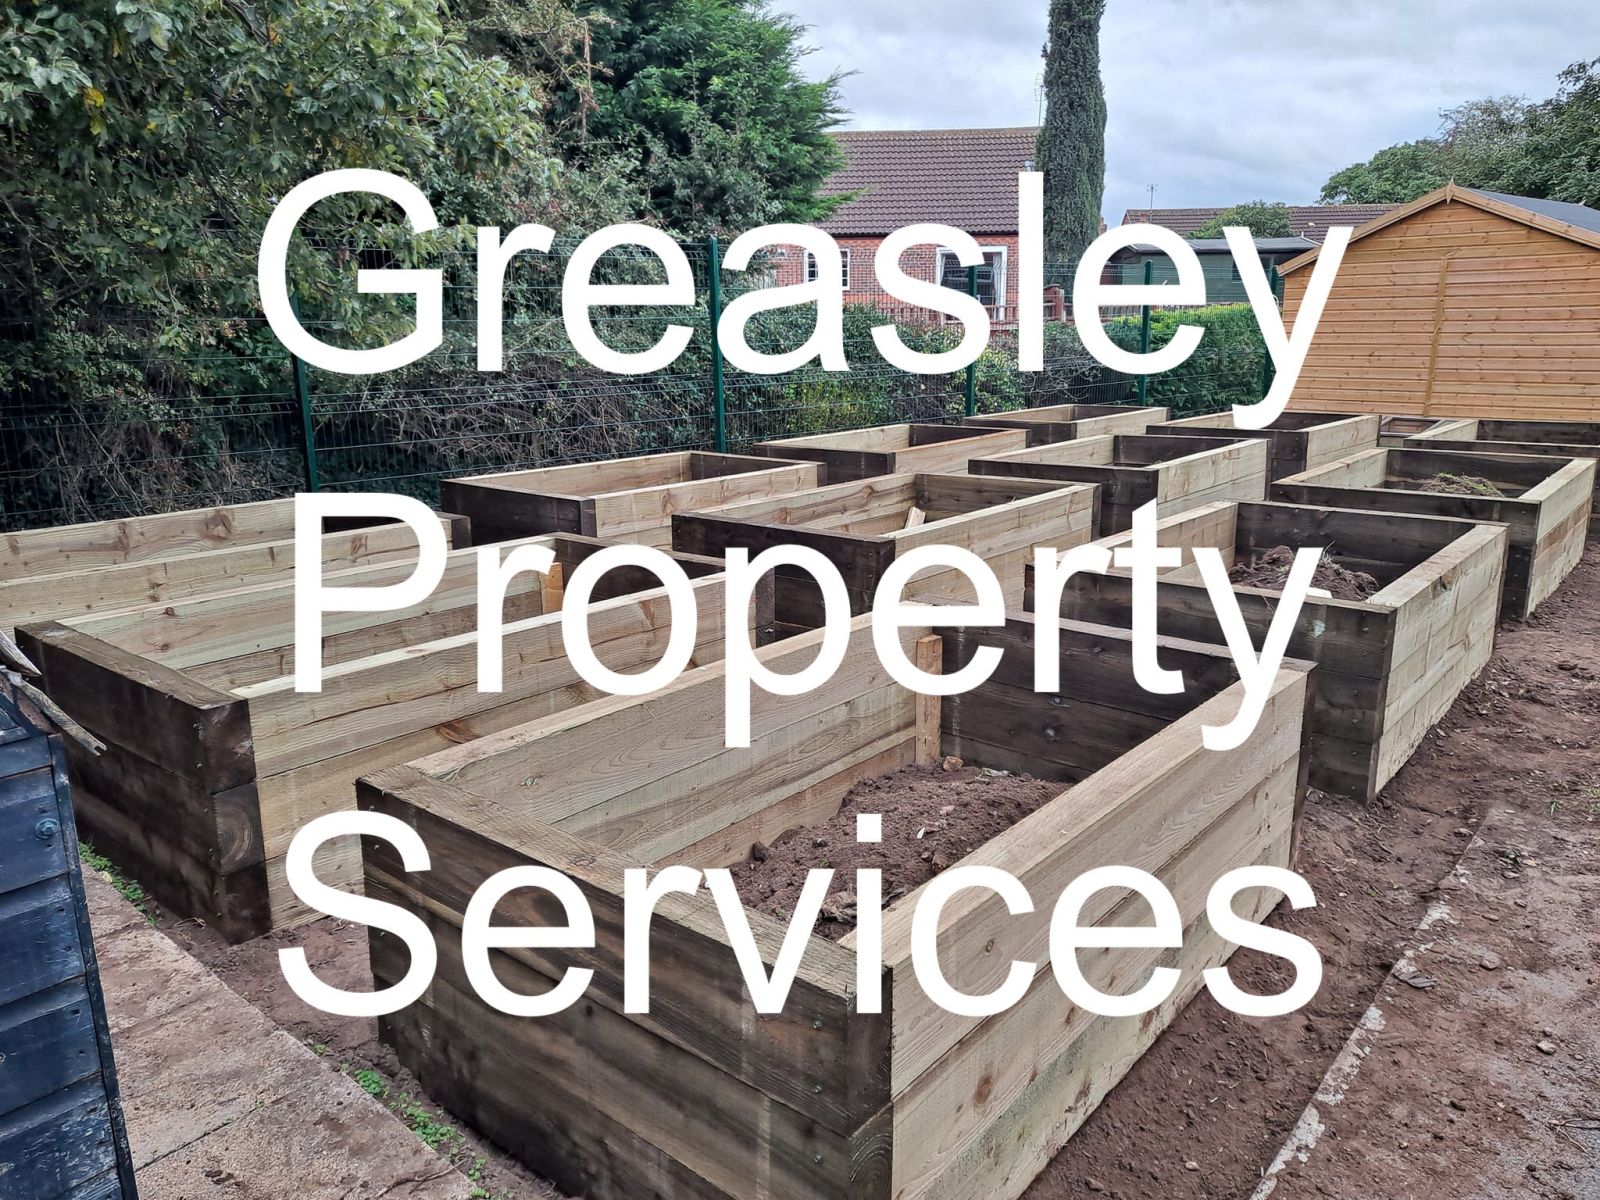 Greasley Property Services projects with railway sleepers in the Vale of Belvoir. Railwaysleepers.com